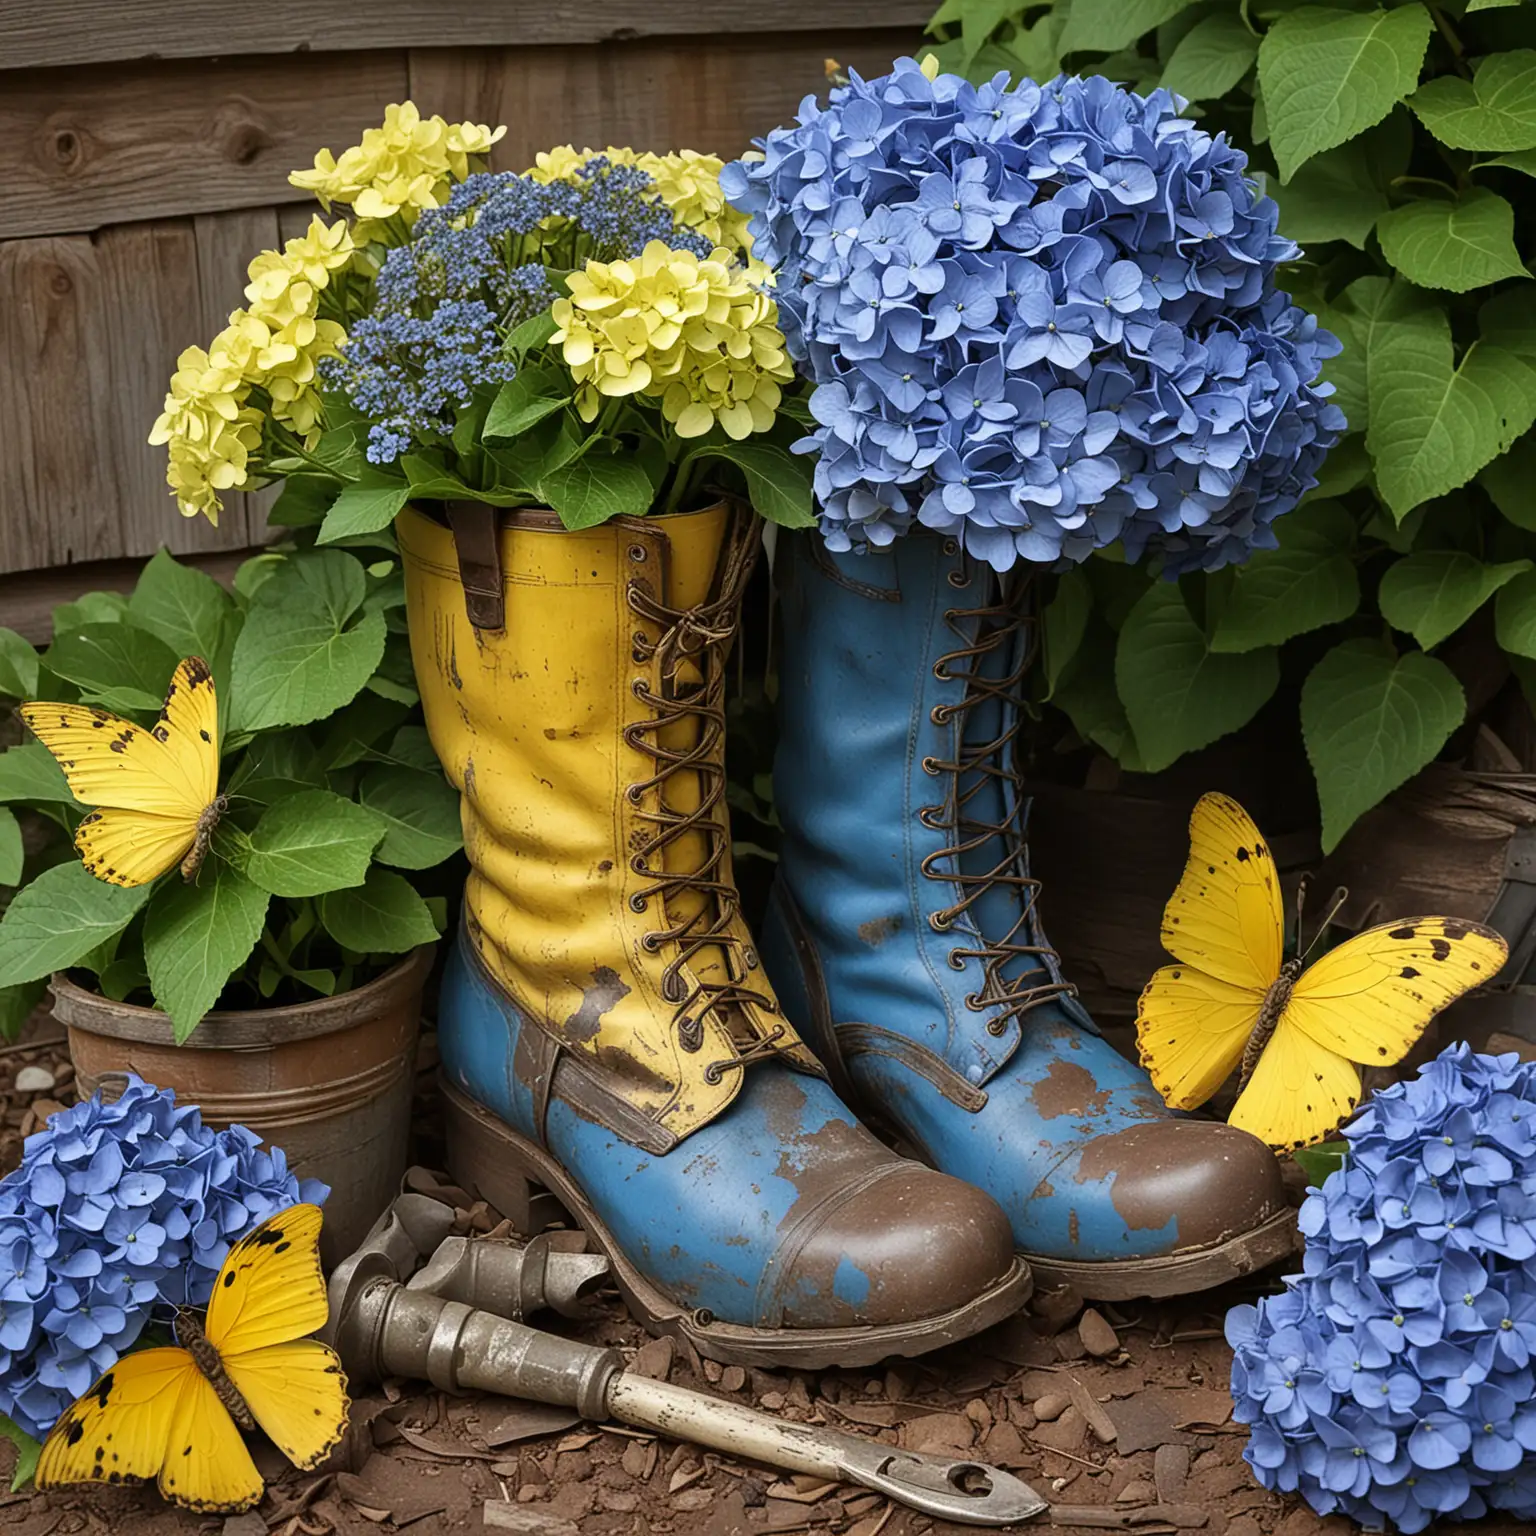 Generate an image of weathered, multicolored garden boots overflowing with lush, blue hydrangeas, with vintage garden tools leaning against them and a bright yellow butterfly gently perched on a petal. cartoony
